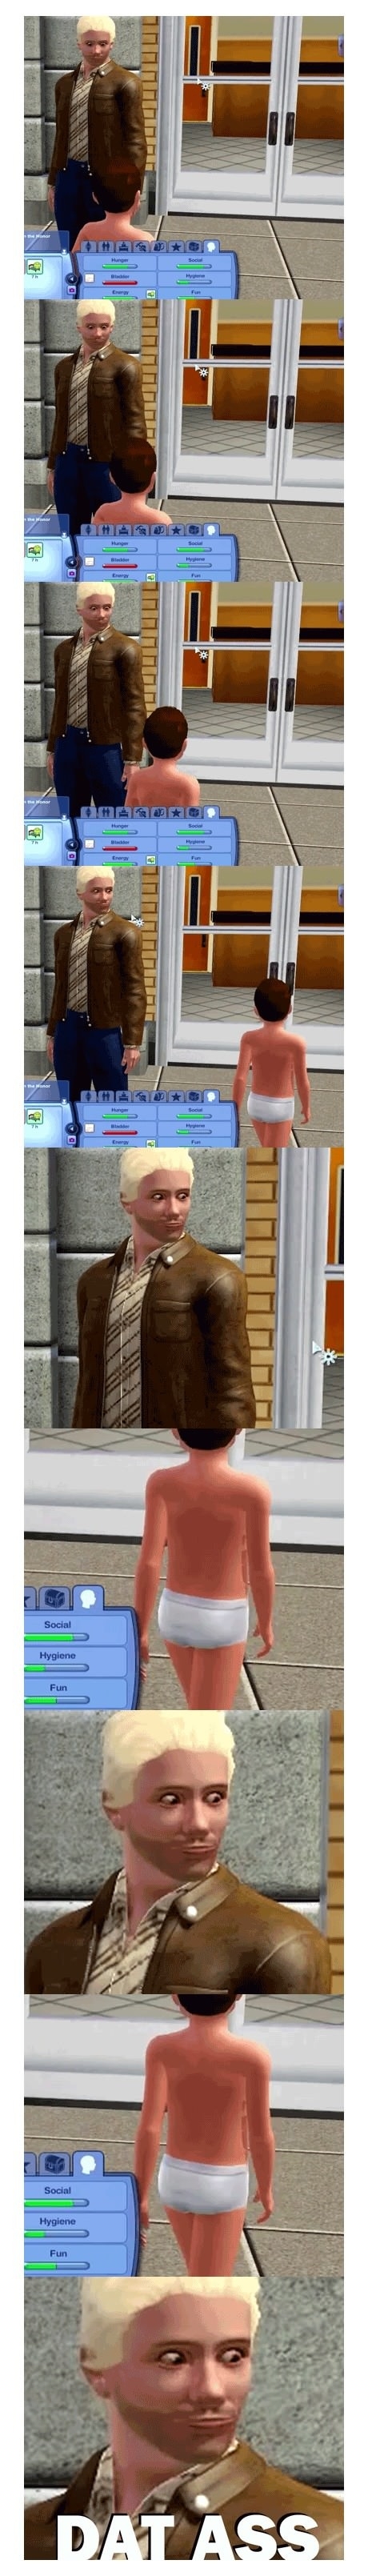 Sims 3 is h0rny